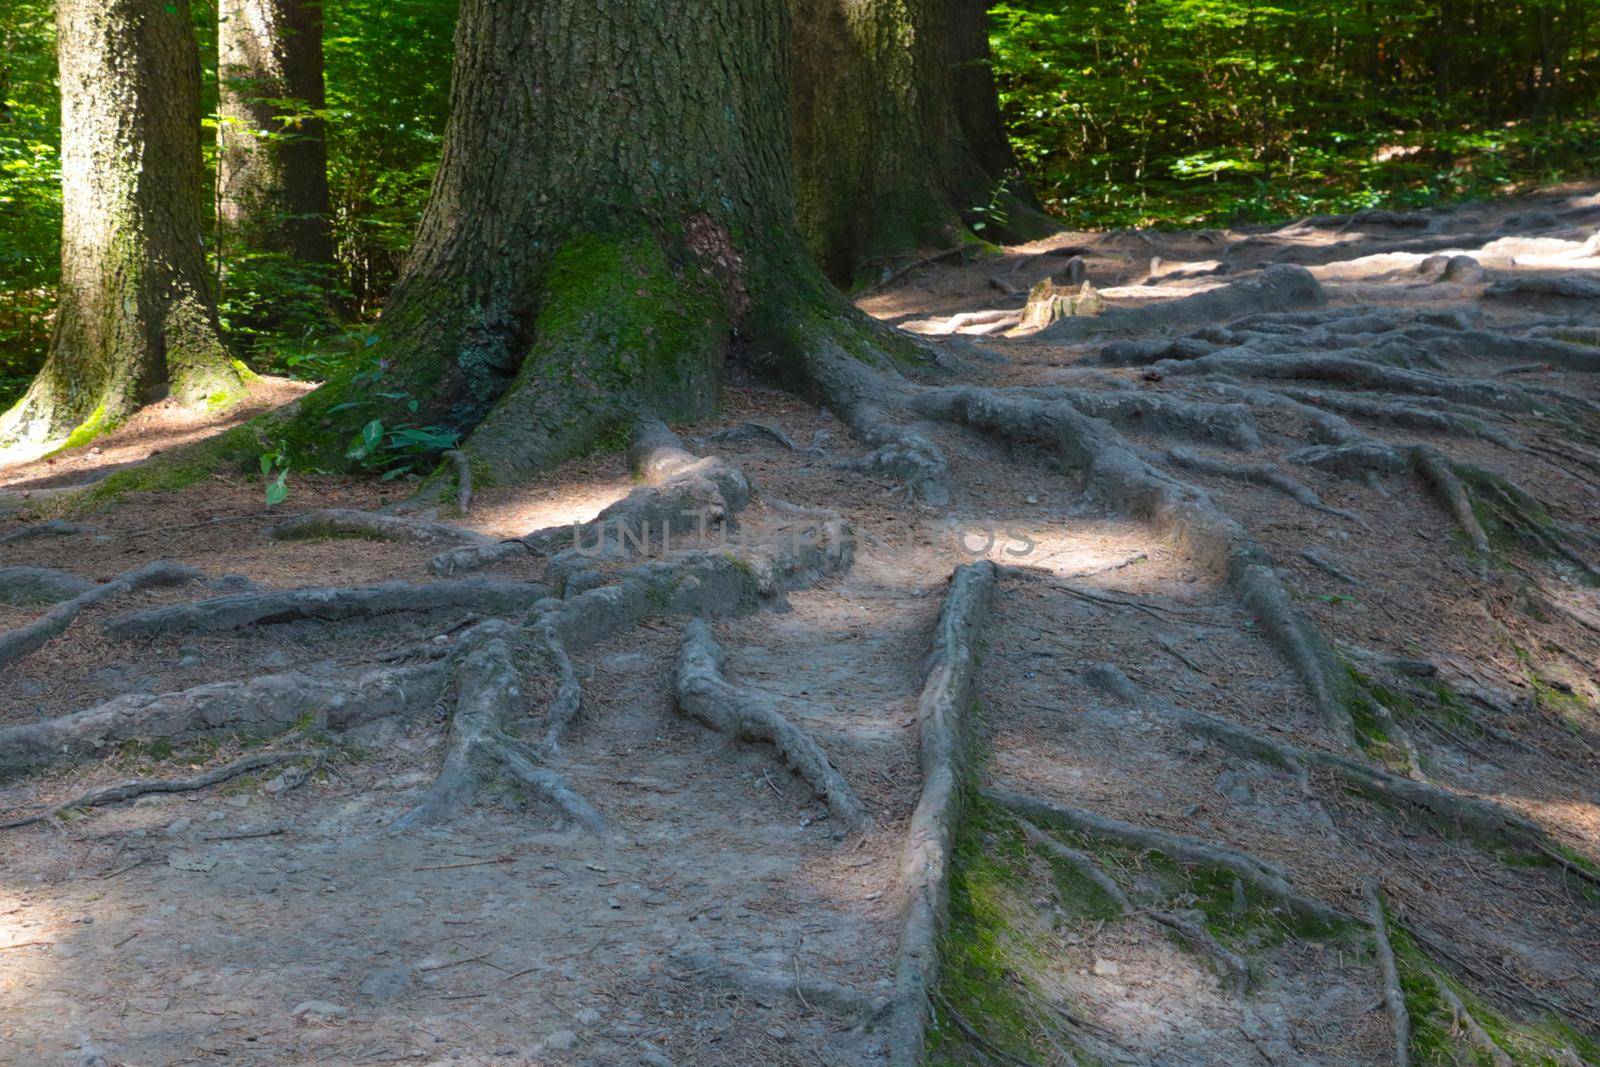 The large roots of the tree protrude from the ground in the forest